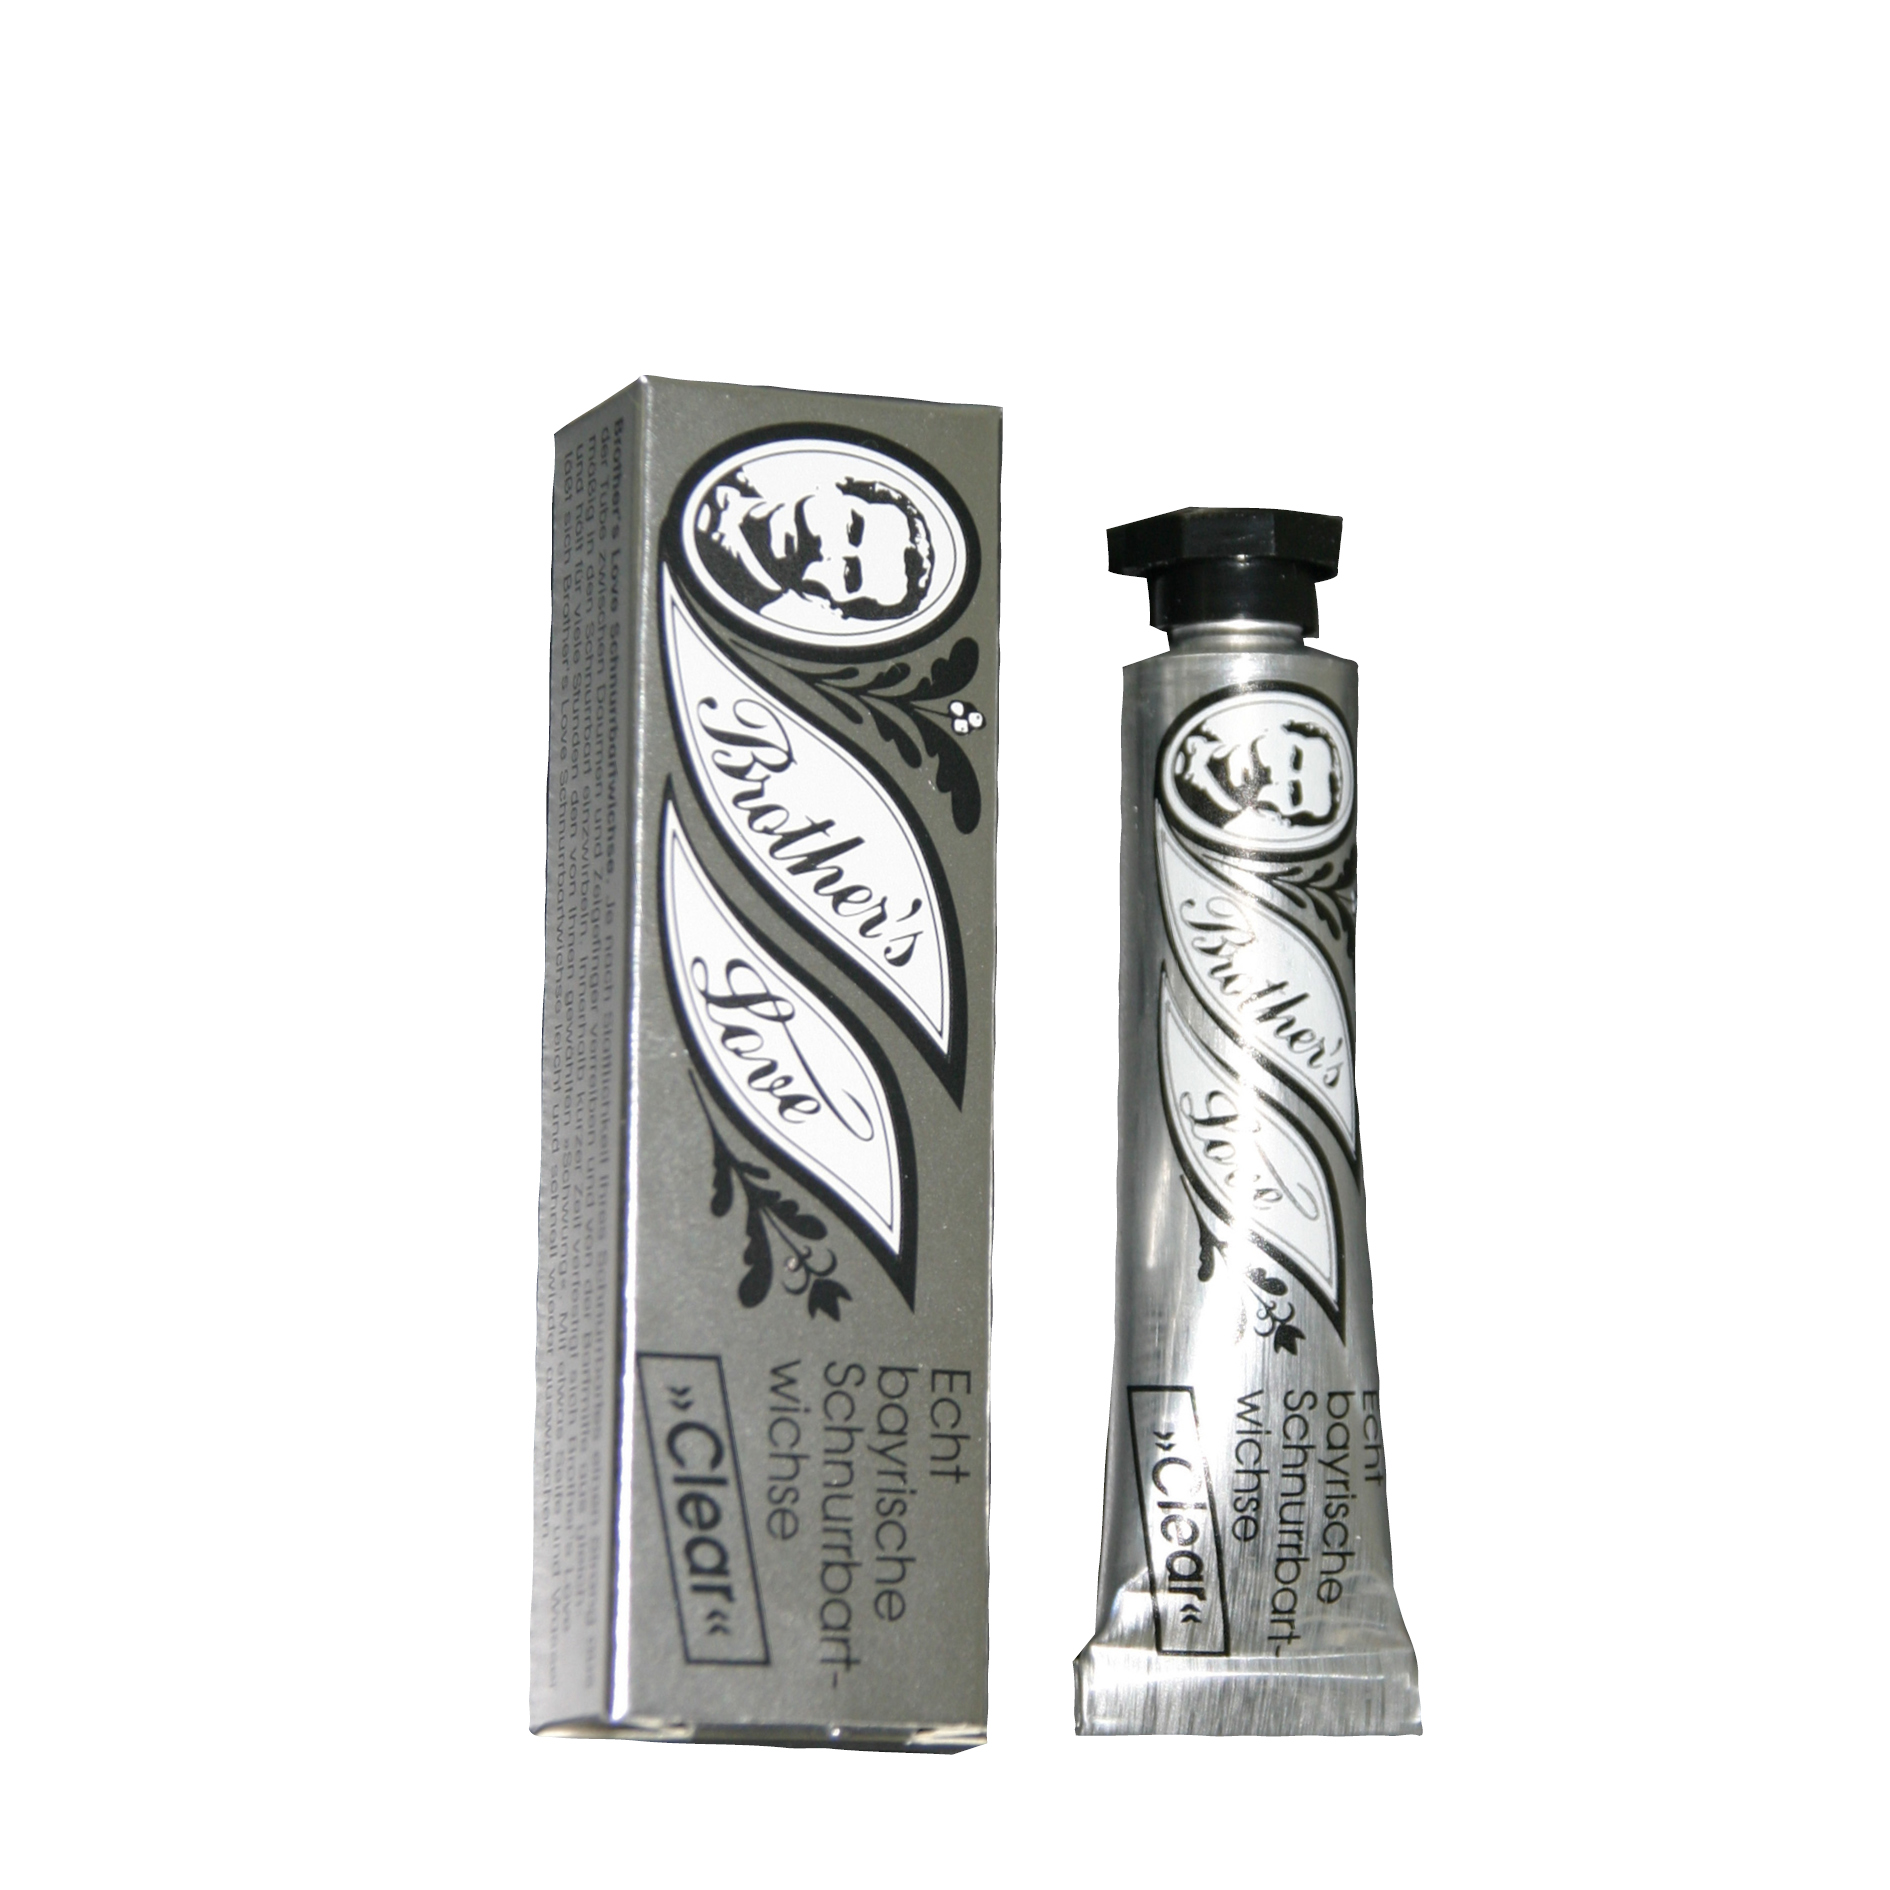 Brothers Bartwichse clear 10ml